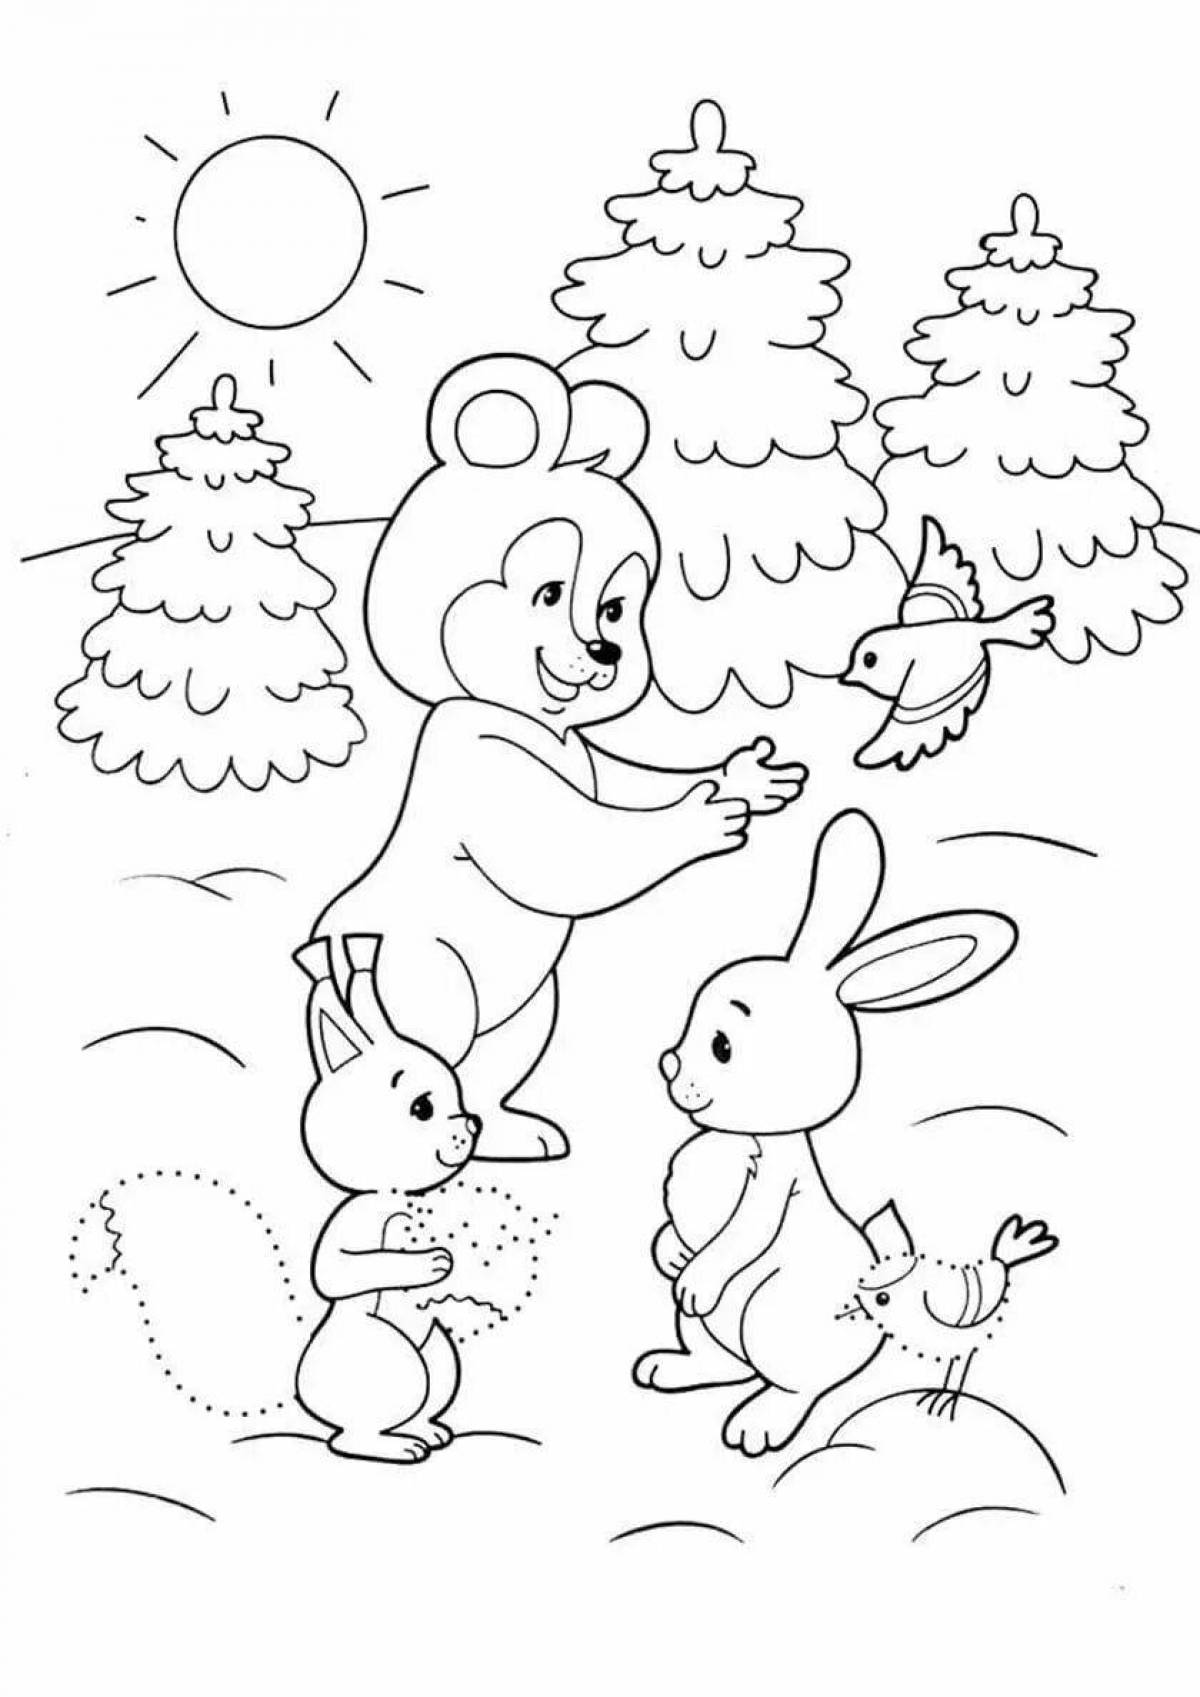 Magic winter coloring book for 3-4 year olds